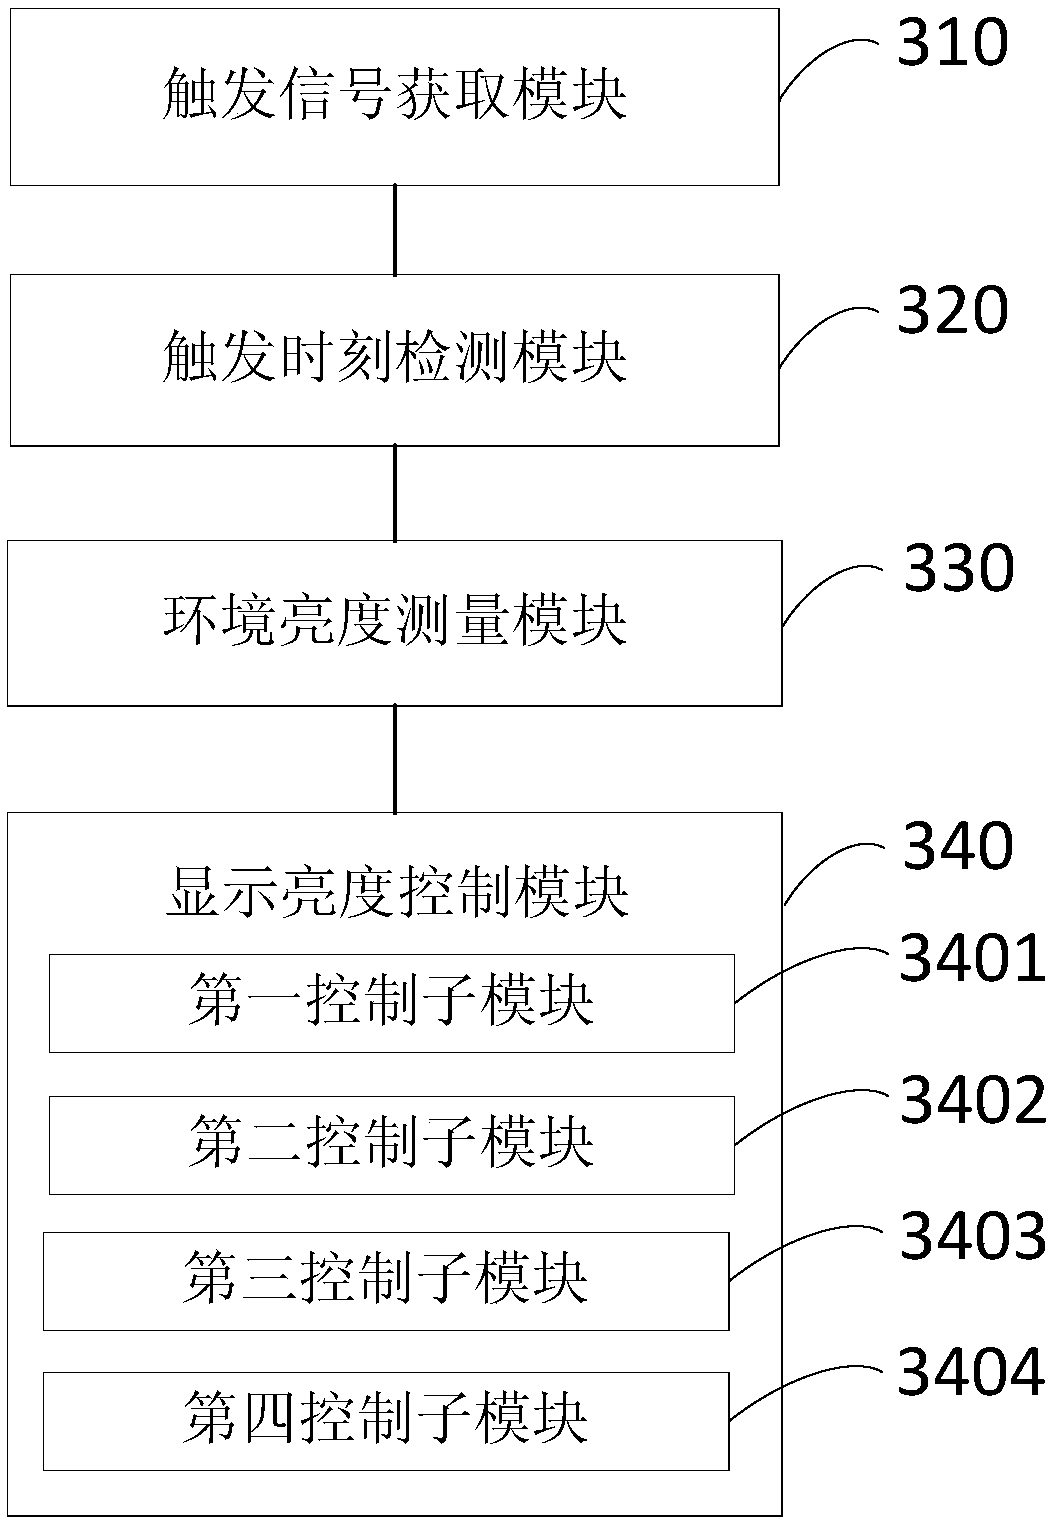 Display screen luminance control method and system